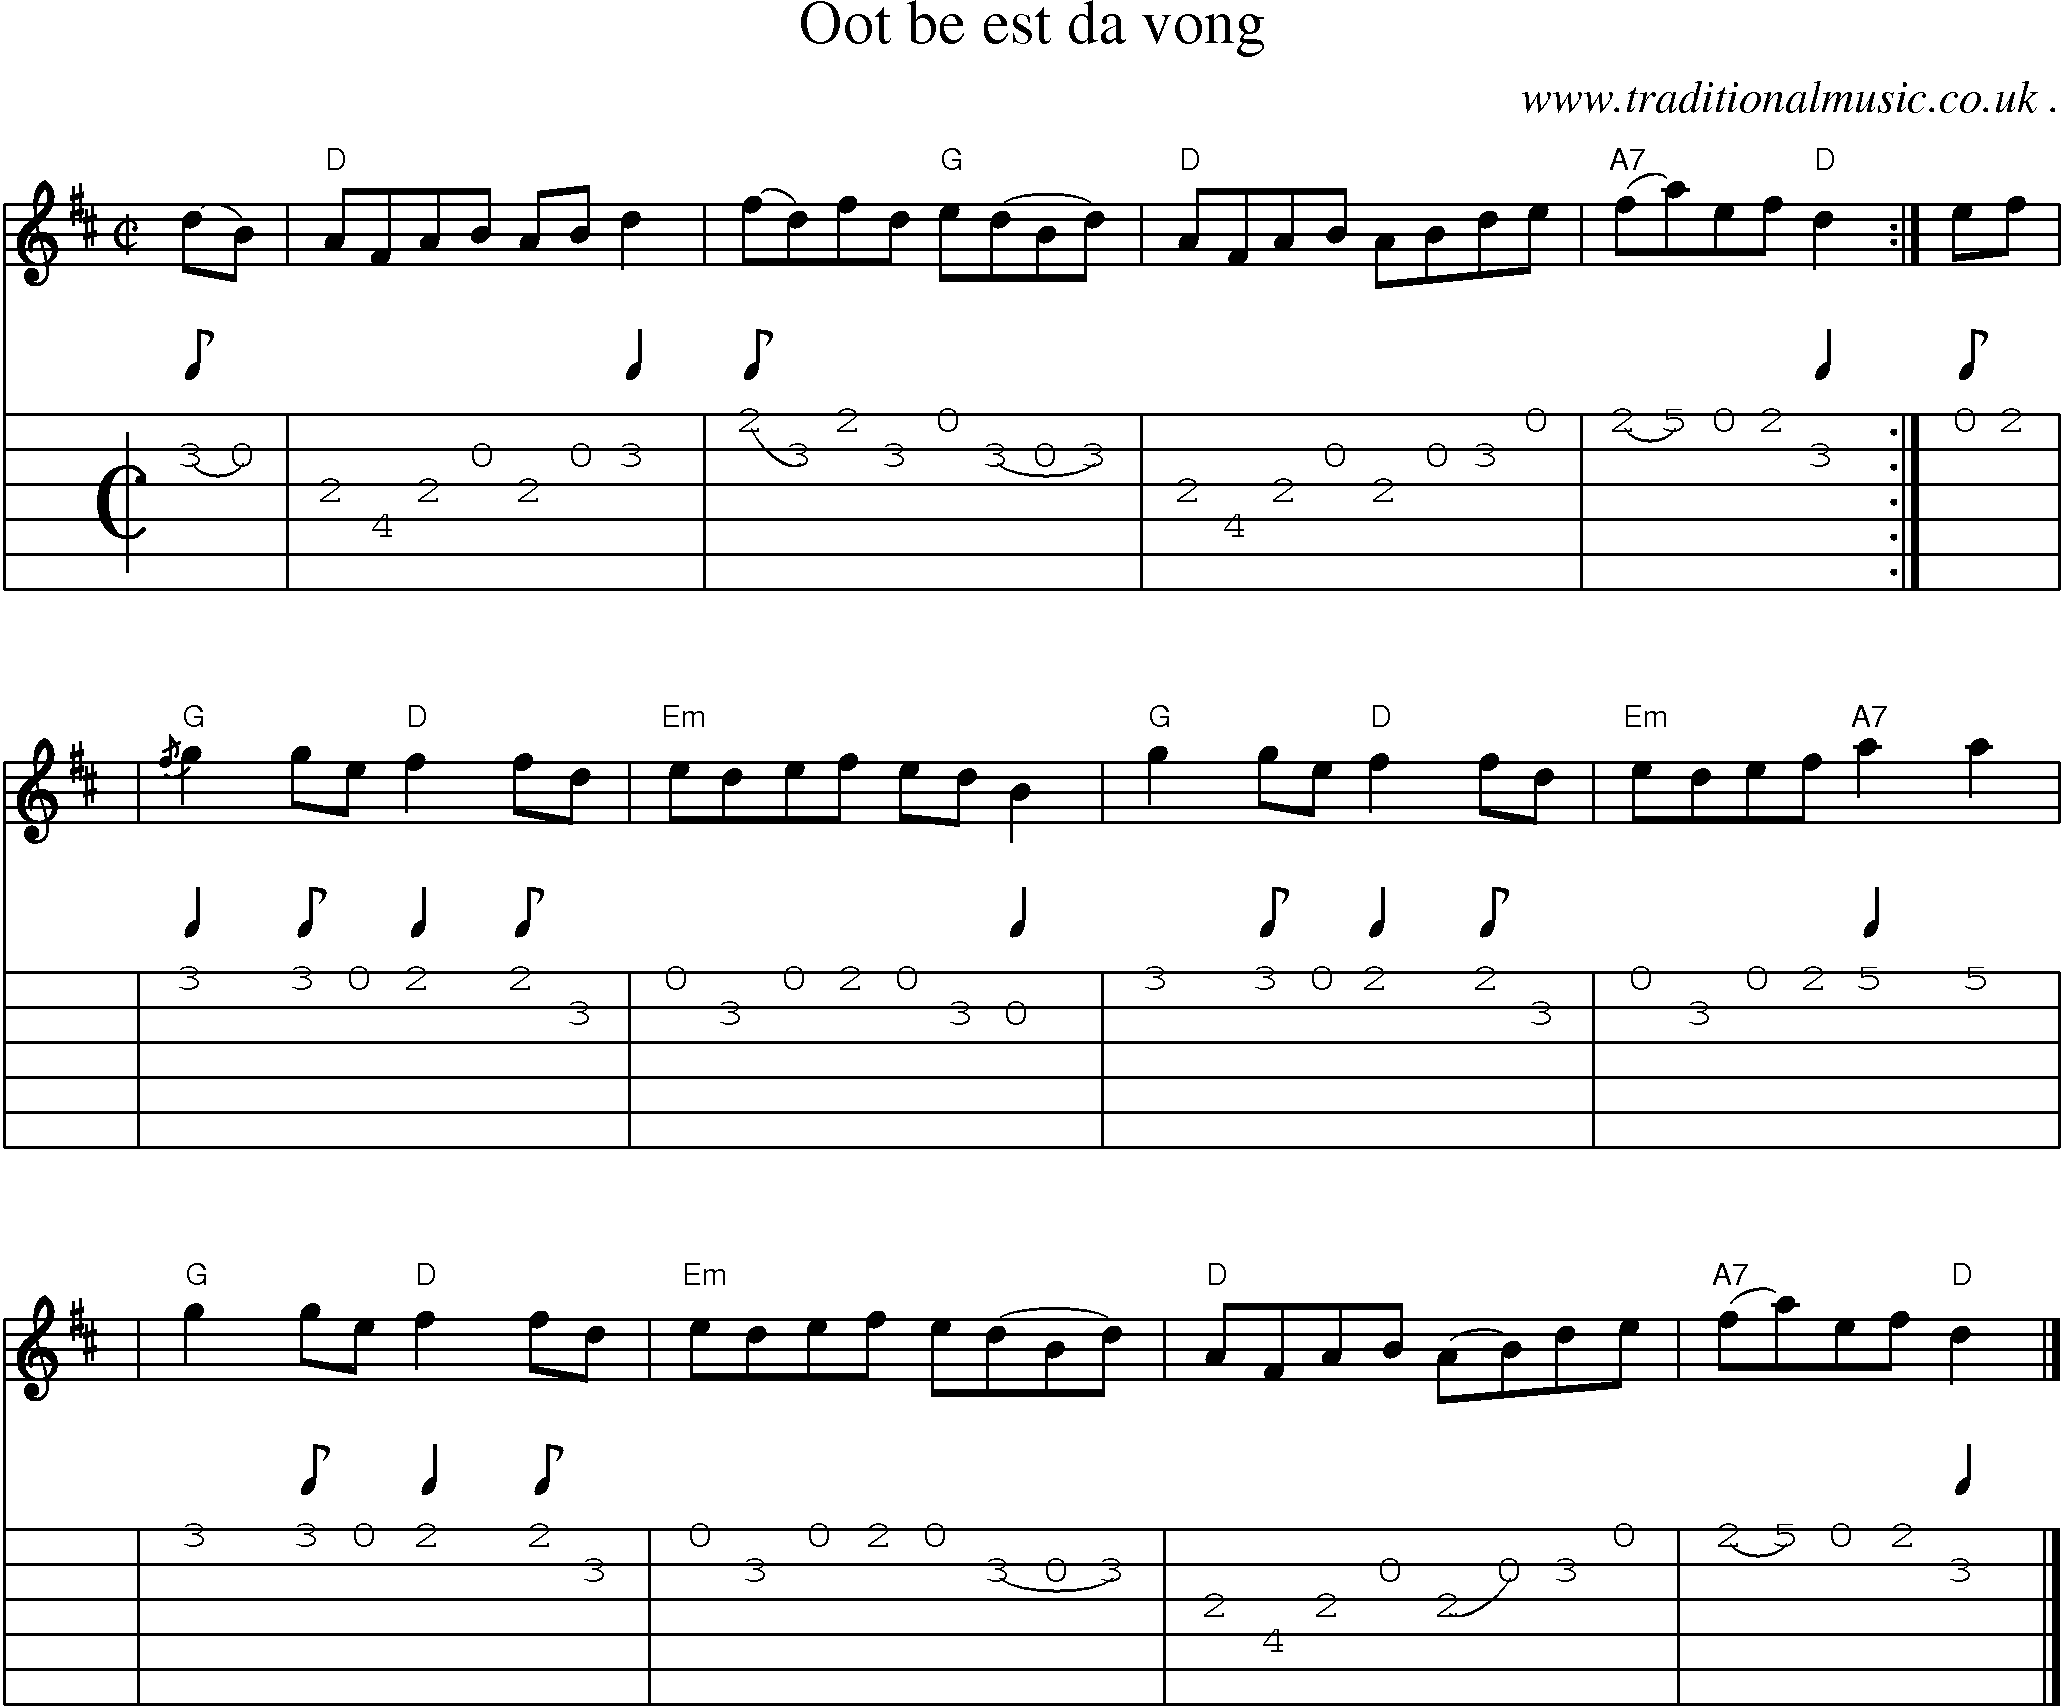 Sheet-music  score, Chords and Guitar Tabs for Oot Be Est Da Vong